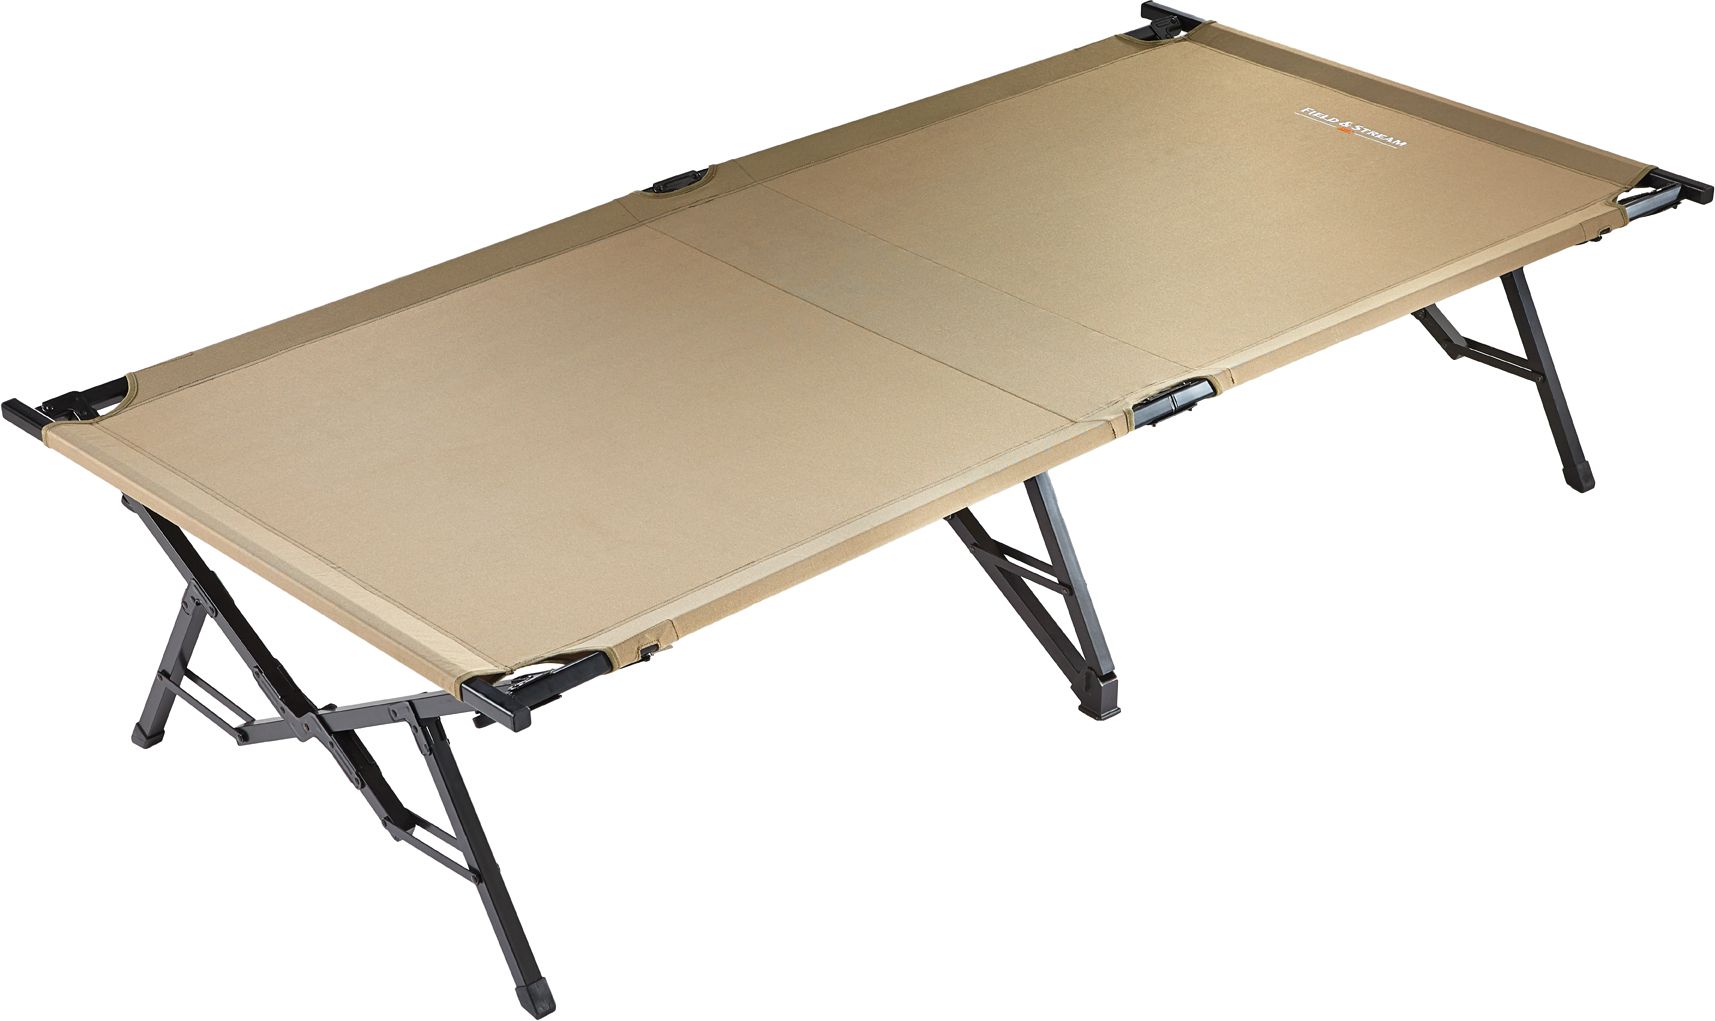 Camping Cots | DICK'S Sporting Goods